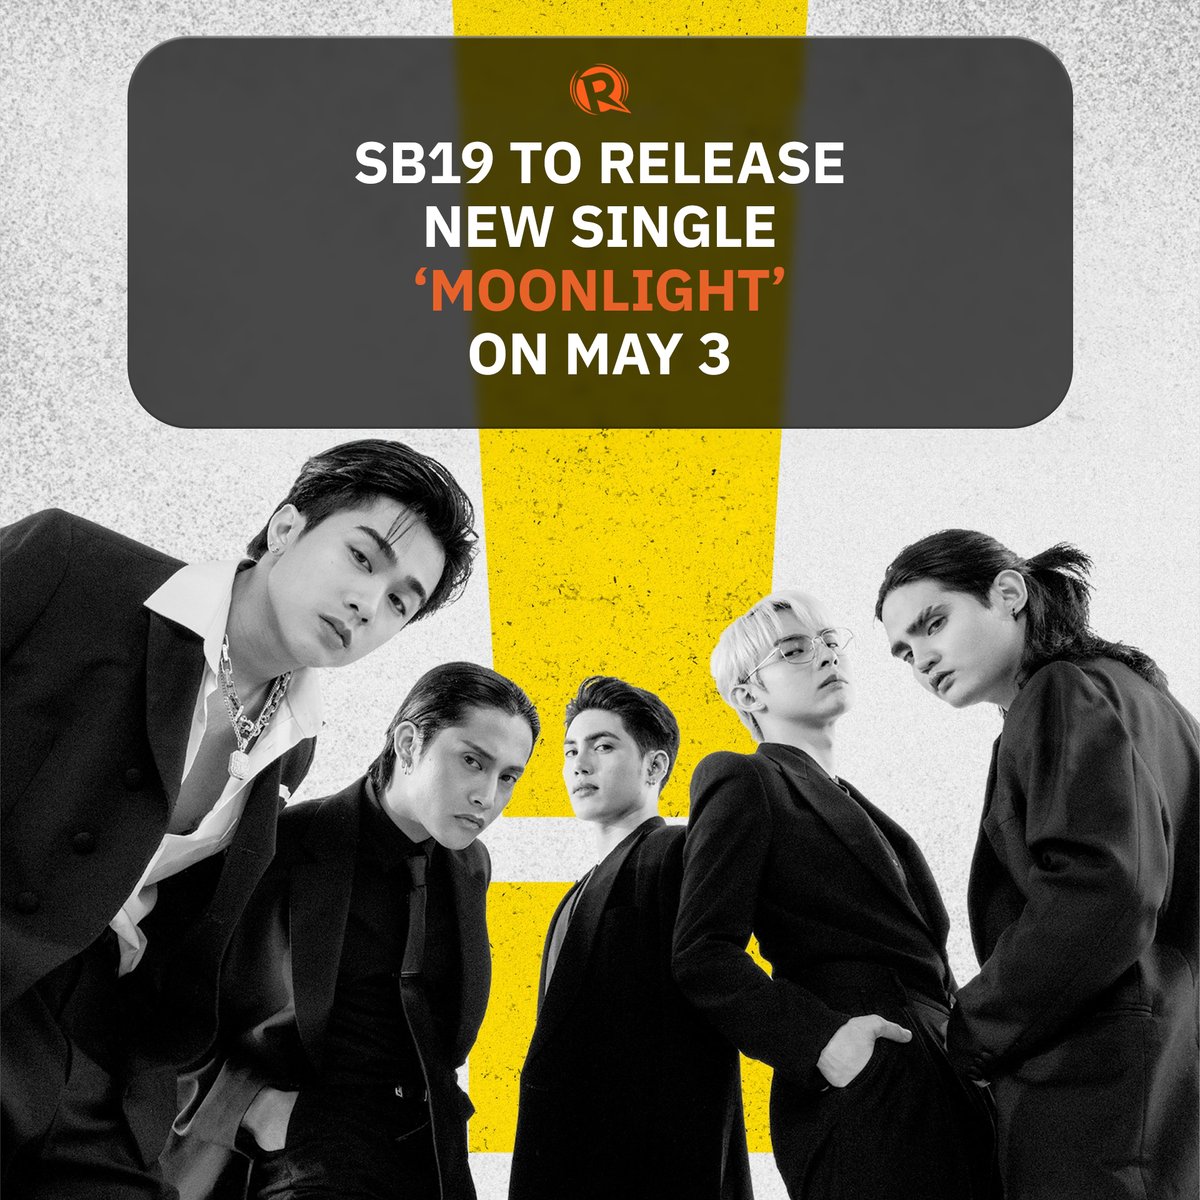 NEW SONG ALERT, A’TIN! P-pop group SB19 is releasing a new single titled “Moonlight” on May 3, in collaboration with DJ-producers Ian Asher and Terry Zhong. #IanxSB19xTerry For more #PPopRise stories, visit: rappler.com/topic/pinoy-pop